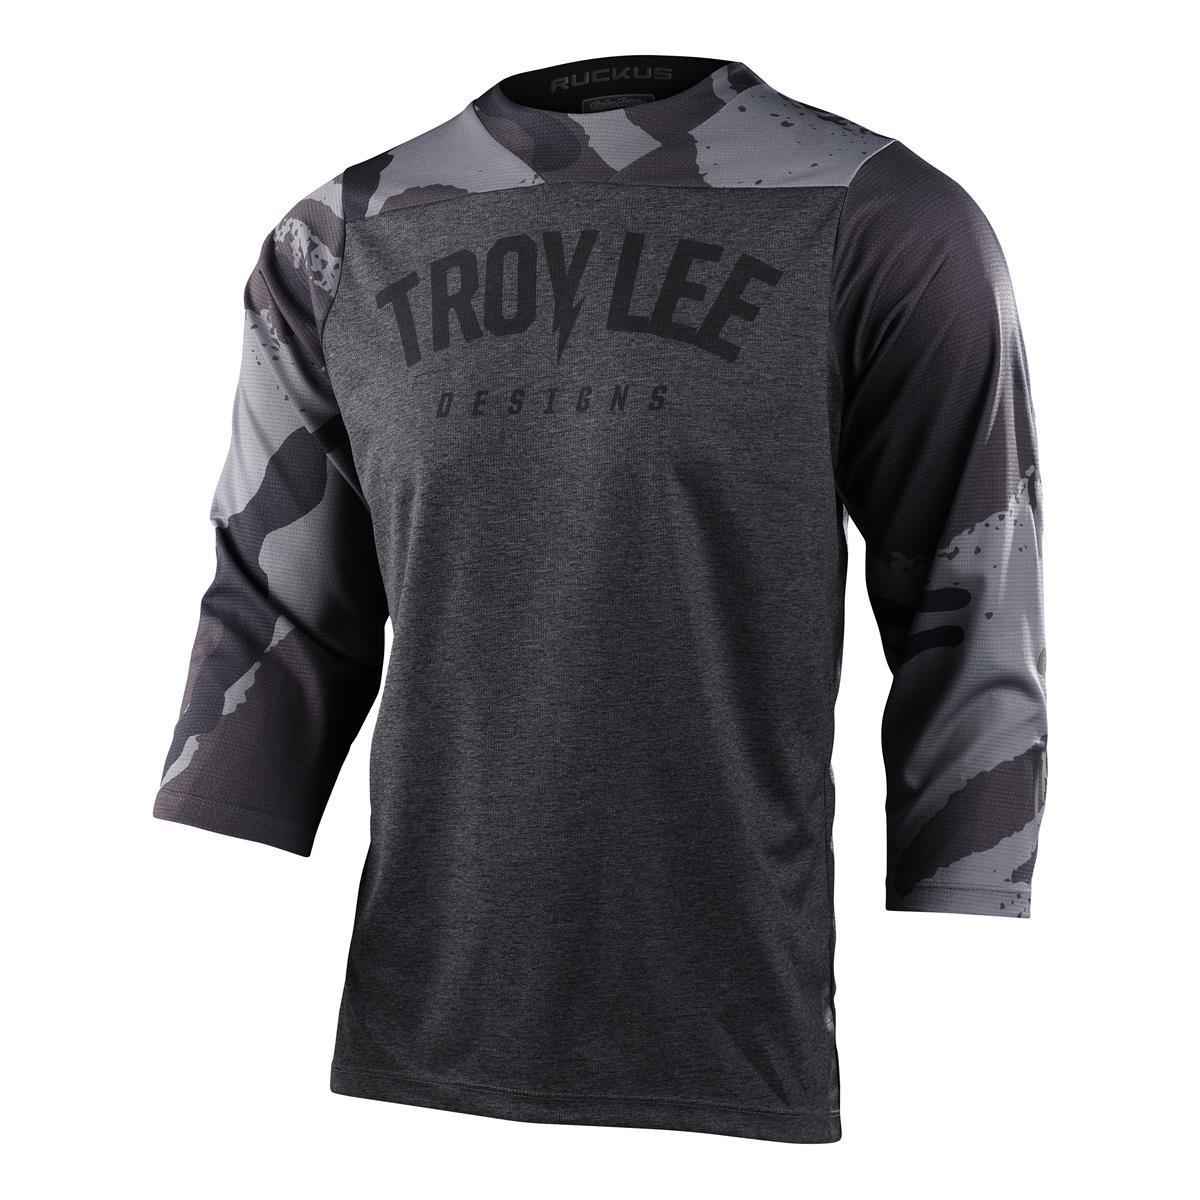 Troy Lee Designs Maillot VTT manches ¾ Ruckus Camber Camo - Black Heather